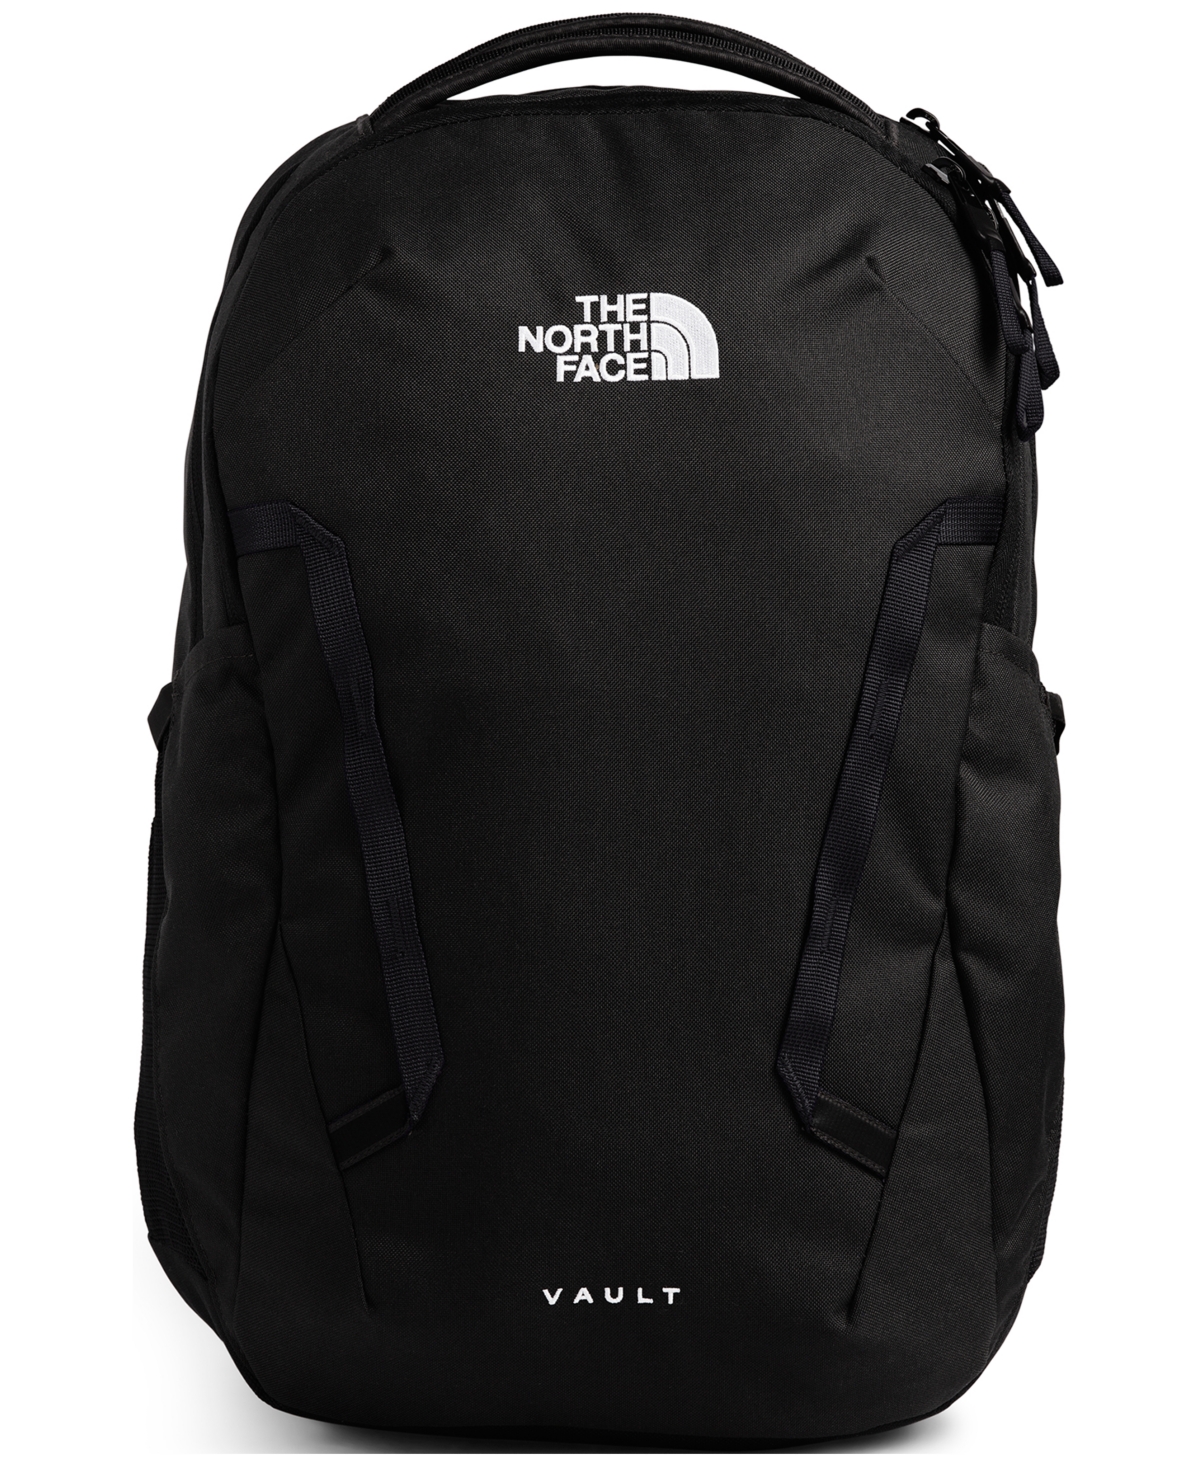 The North Face Women's Vault Backpack In Tnf Black